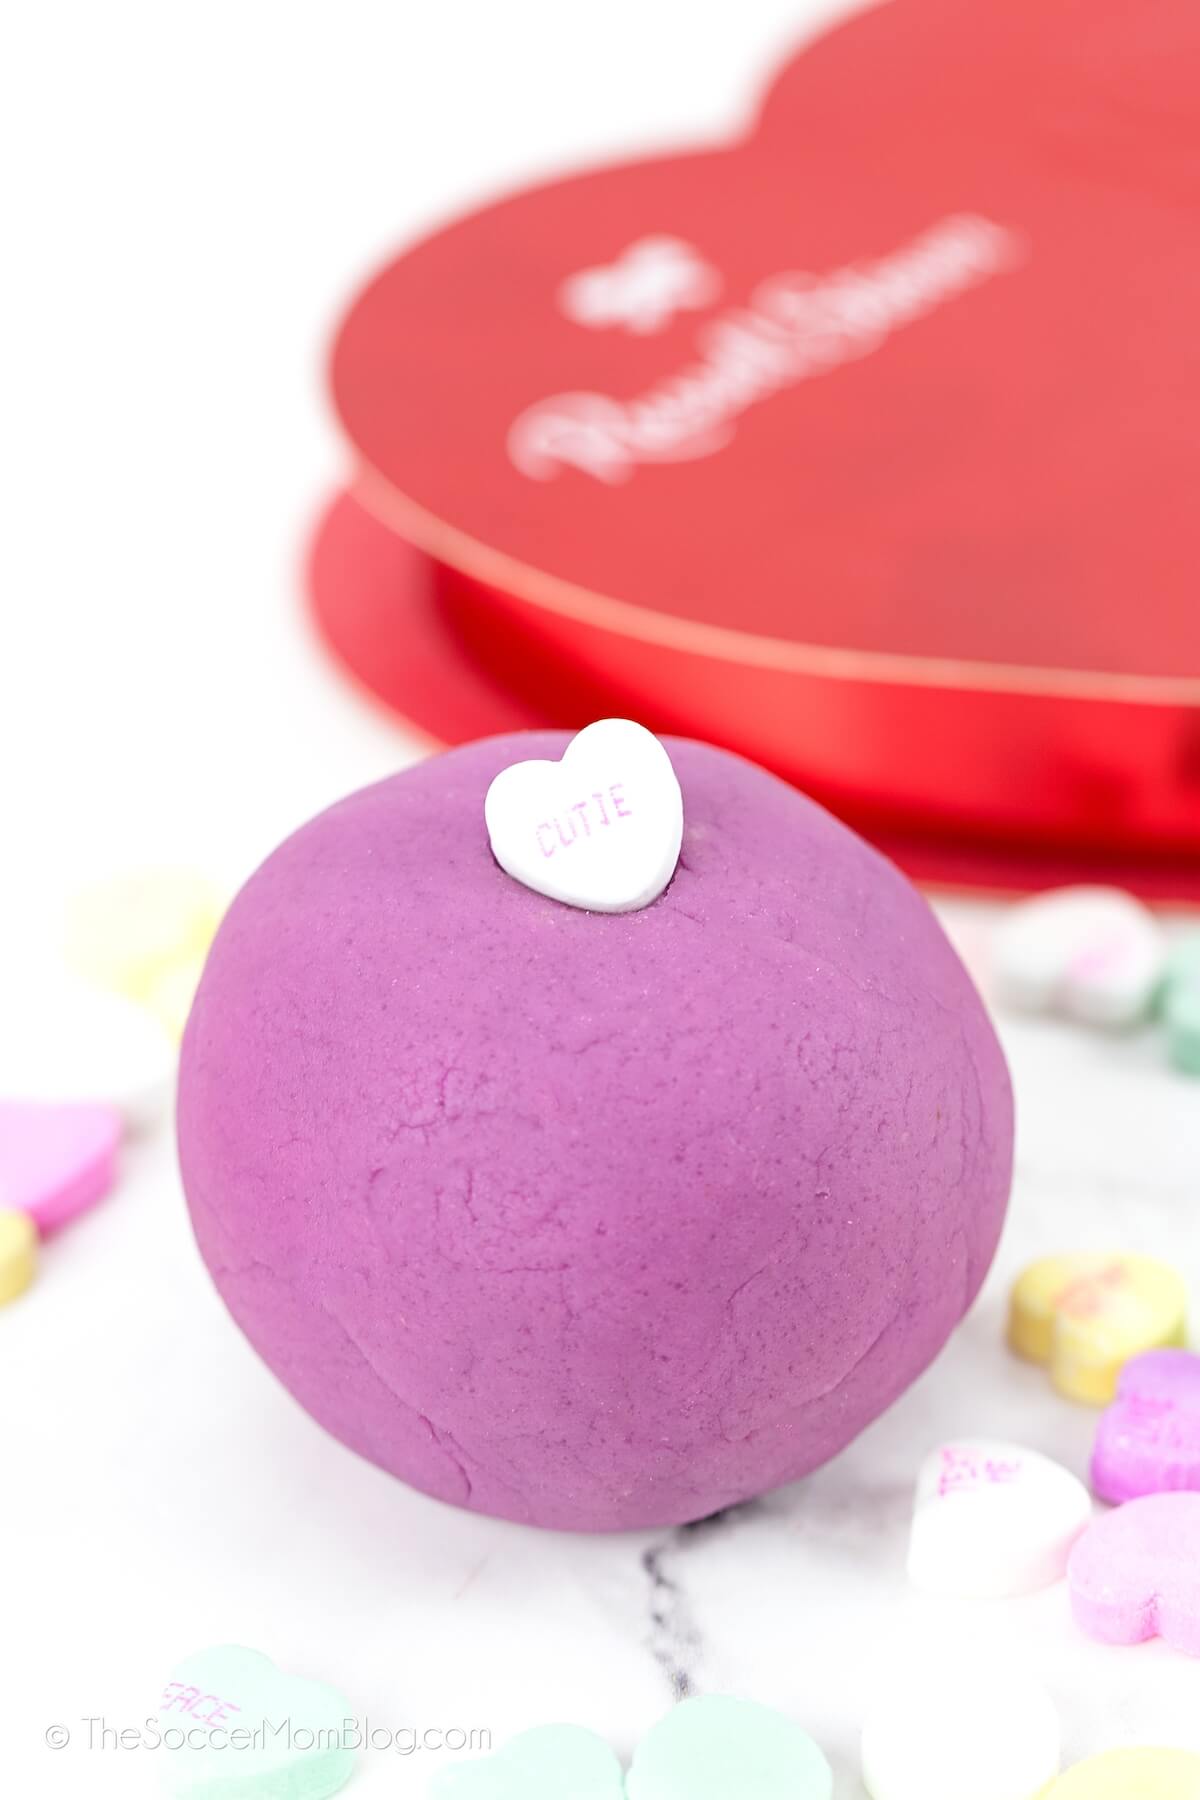 Purple ball of playdough with heart on top